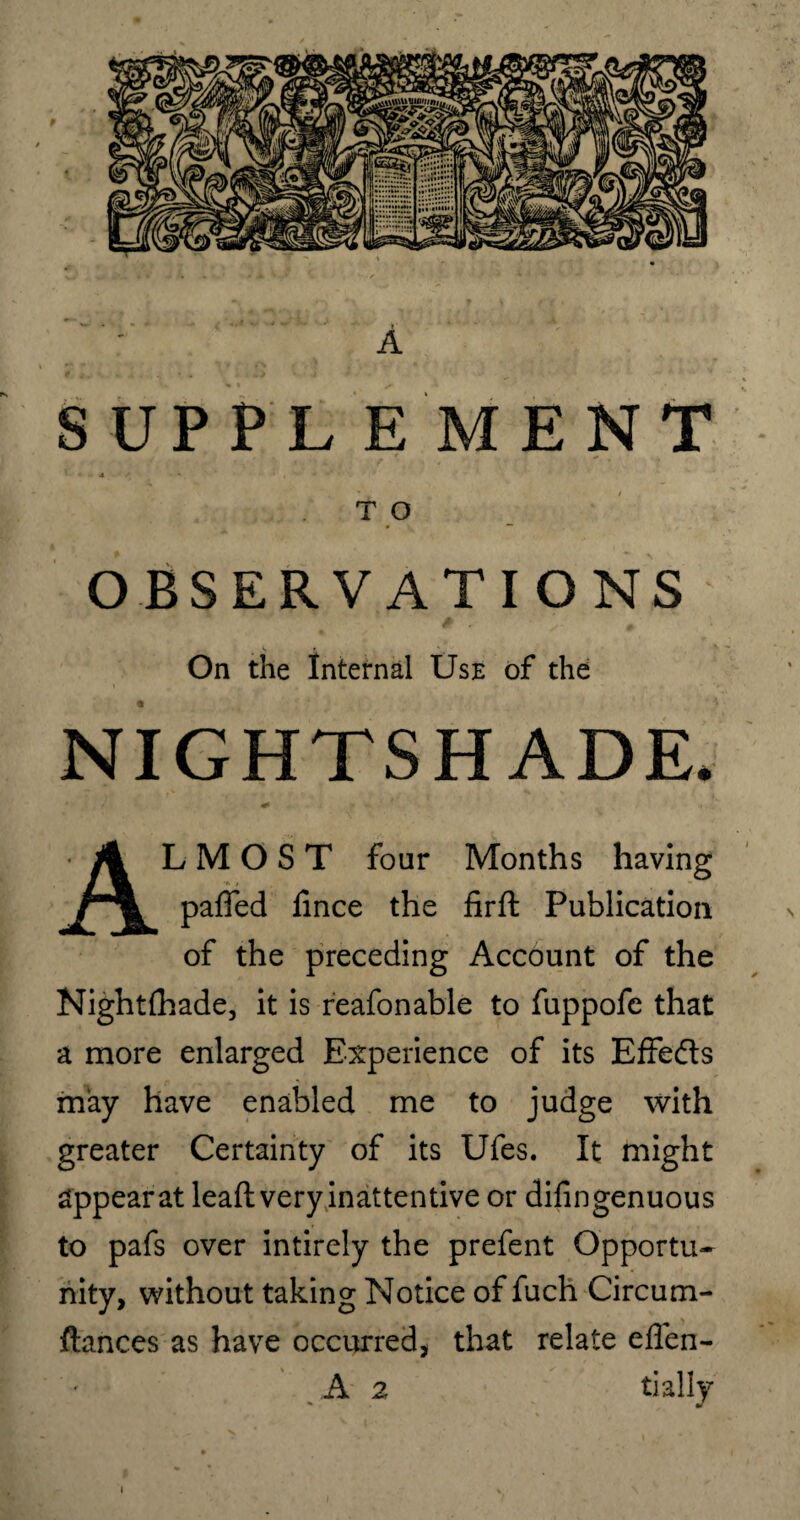 9 A SUPPL E MENT 4 ' / V T O OBSERVATIONS On the Internal Use of the NIGHTSHADE. ALMOST four Months having paffed fince the firft Publication of the preceding Account of the Nightfhade, it is reafonable to fuppofe that a more enlarged Experience of its Effedts may have enabled me to judge with greater Certainty of its Ufes. It might appearat leaft very inattentive or difingenuous to pafs over intirely the prefent Opportu¬ nity, without taking Notice of fuch Circum- ftances as have occurred, that relate eflen- A 2 tially